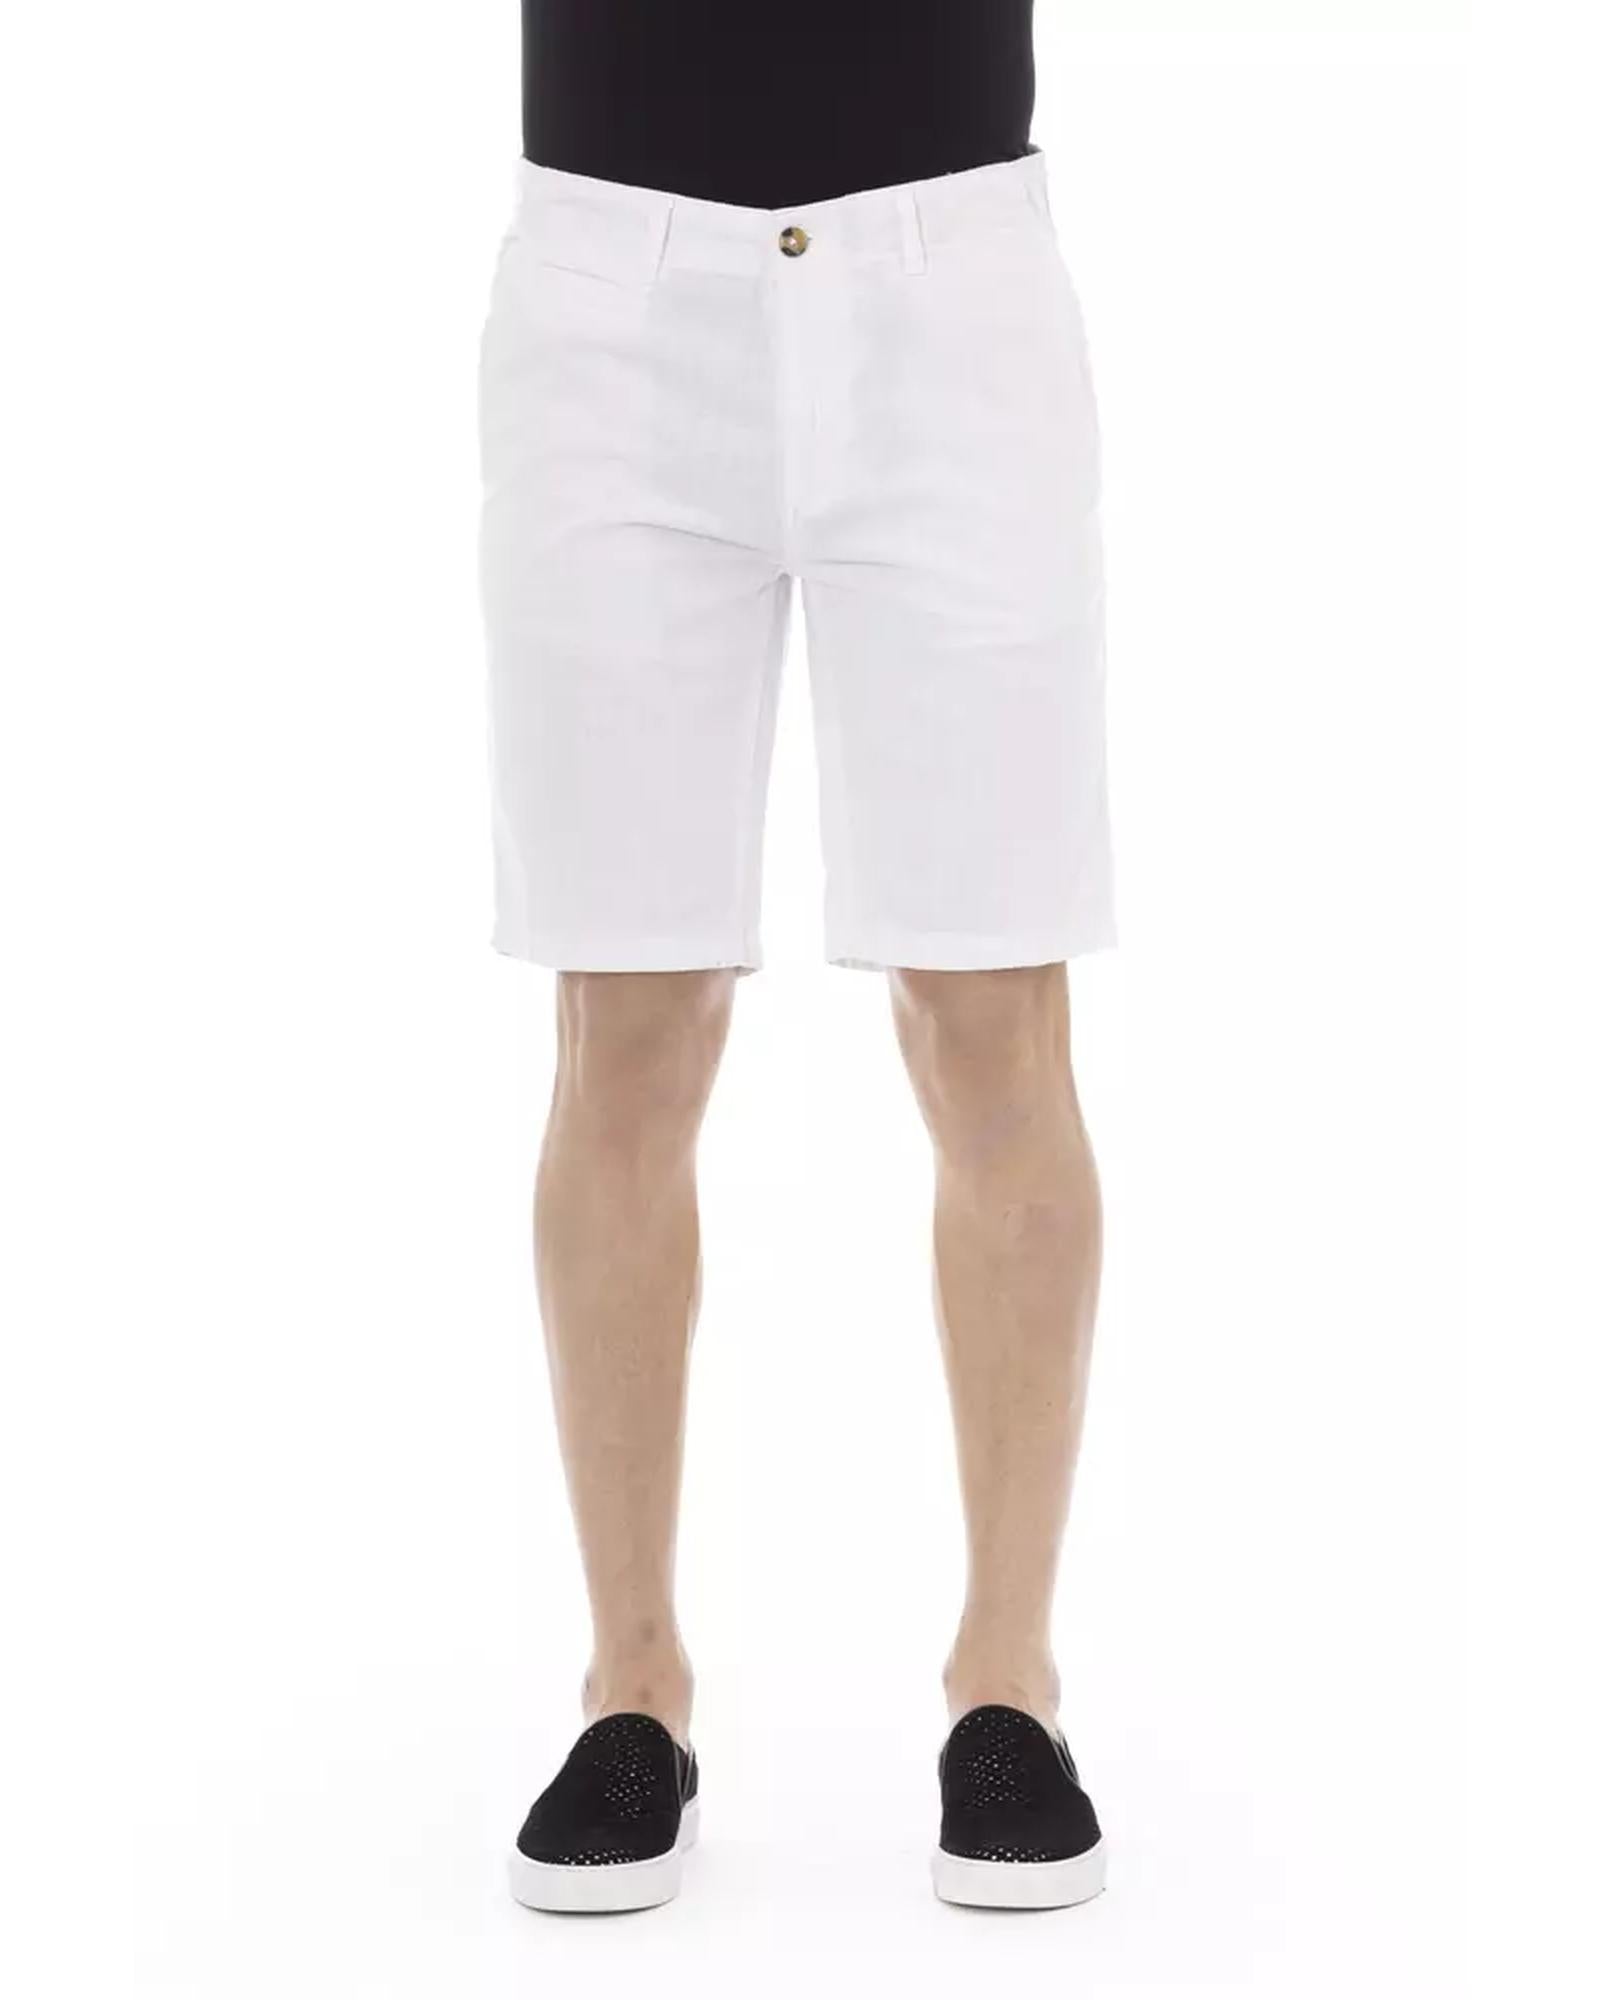 Solid Color Bermuda Shorts with Zipper and Button Closure W48 US Men